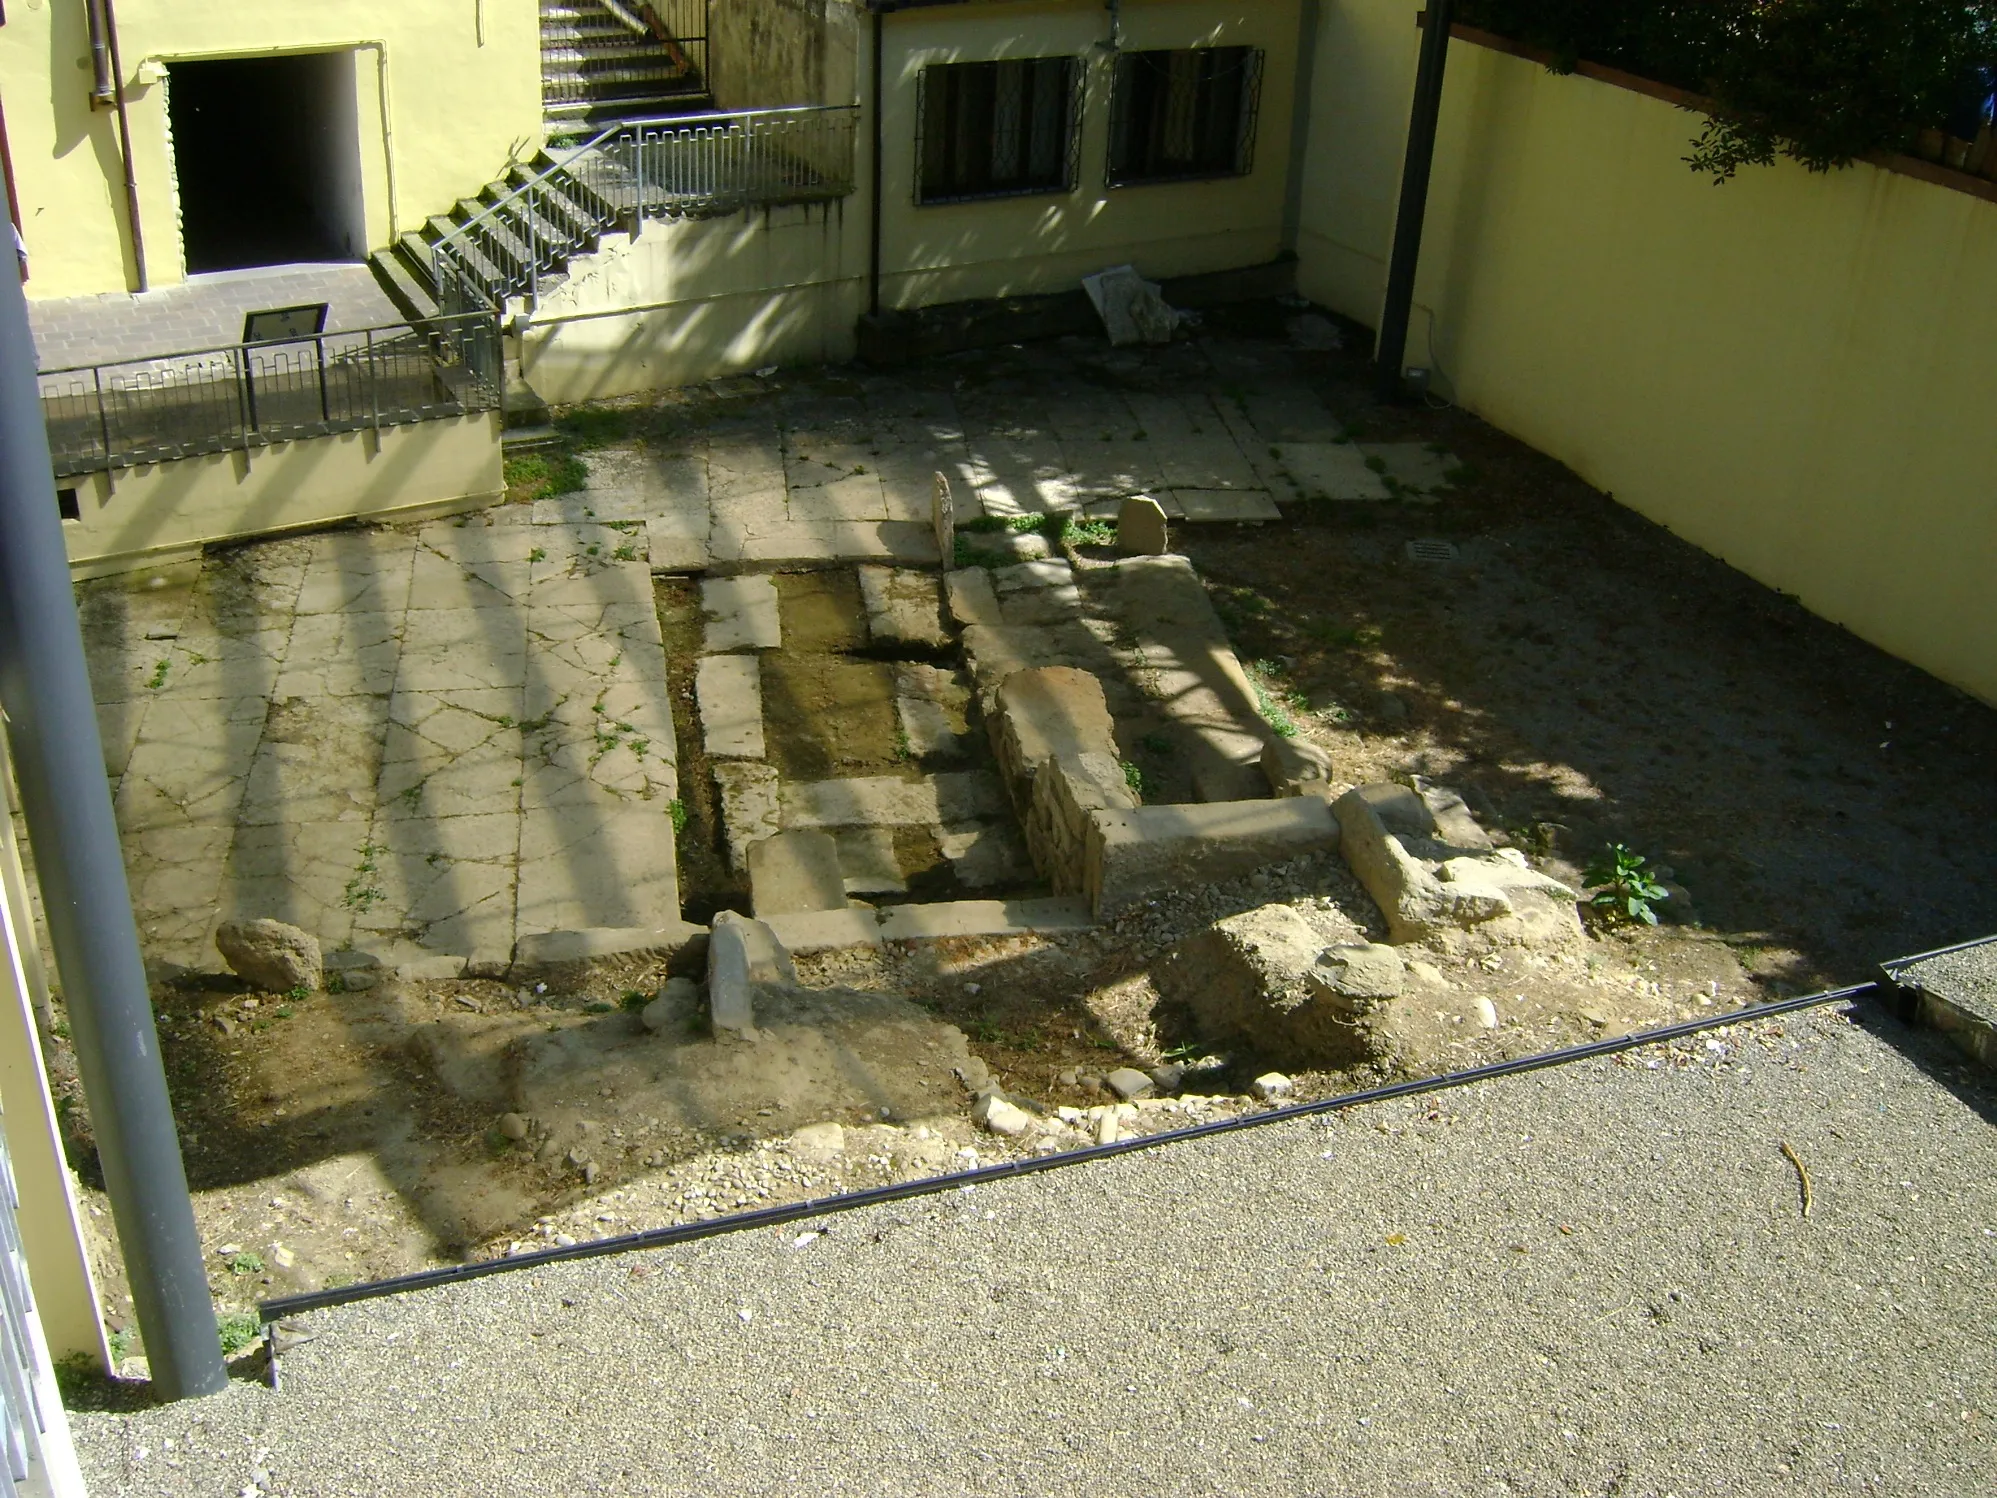 Photo showing: The remains of the ancient Roman forum of Sarsina, in the province of Forlì-Cesena, Emilia-Romagna